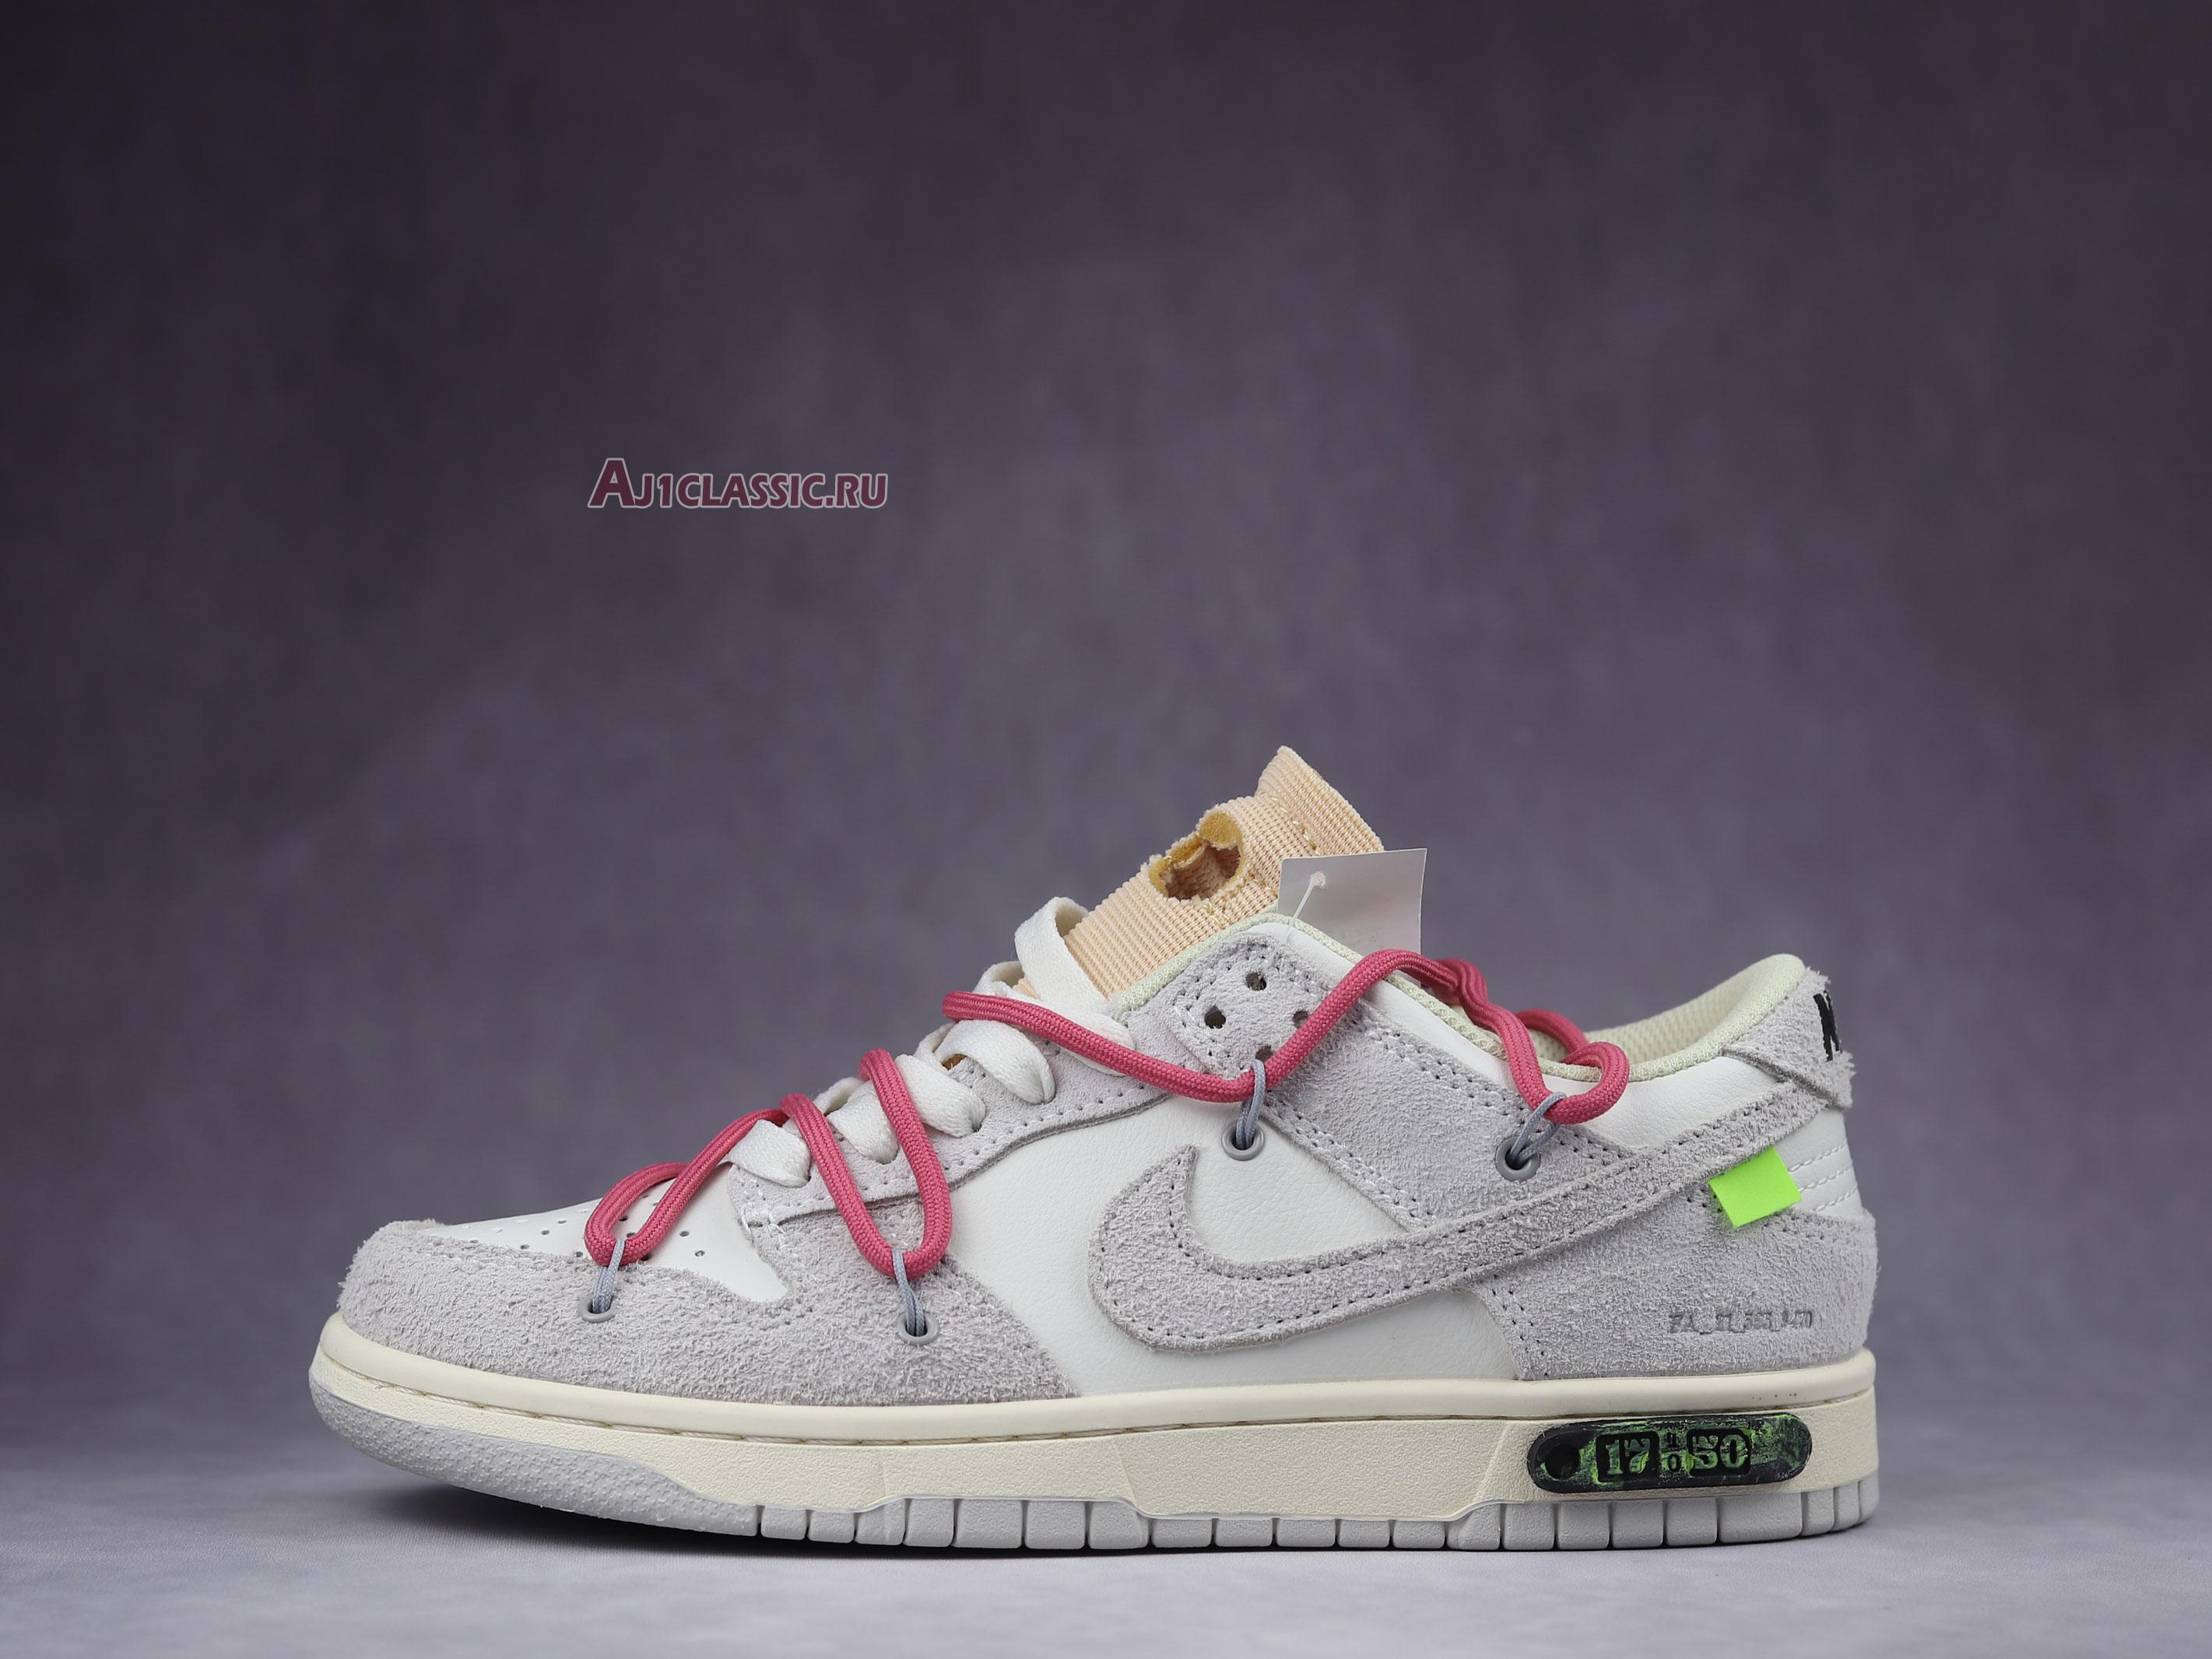 Off-White x Nike Dunk Low Lot 17 of 50 DJ0950-117 Sail/Neutral Grey/Hyper Pink Sneakers